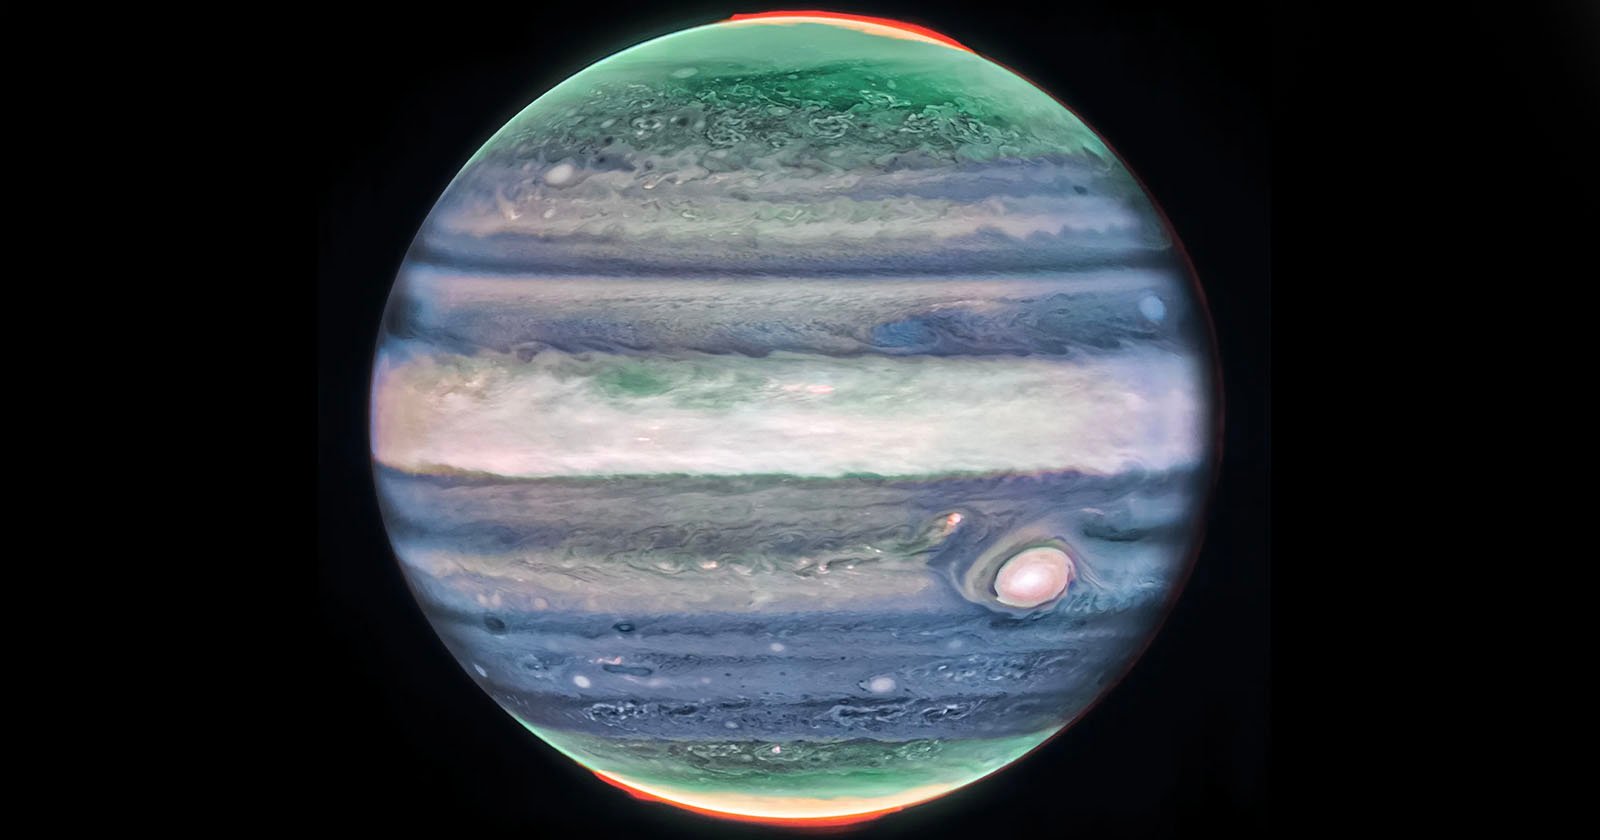  webb snaps never-before-seen feature jupiter atmosphere 